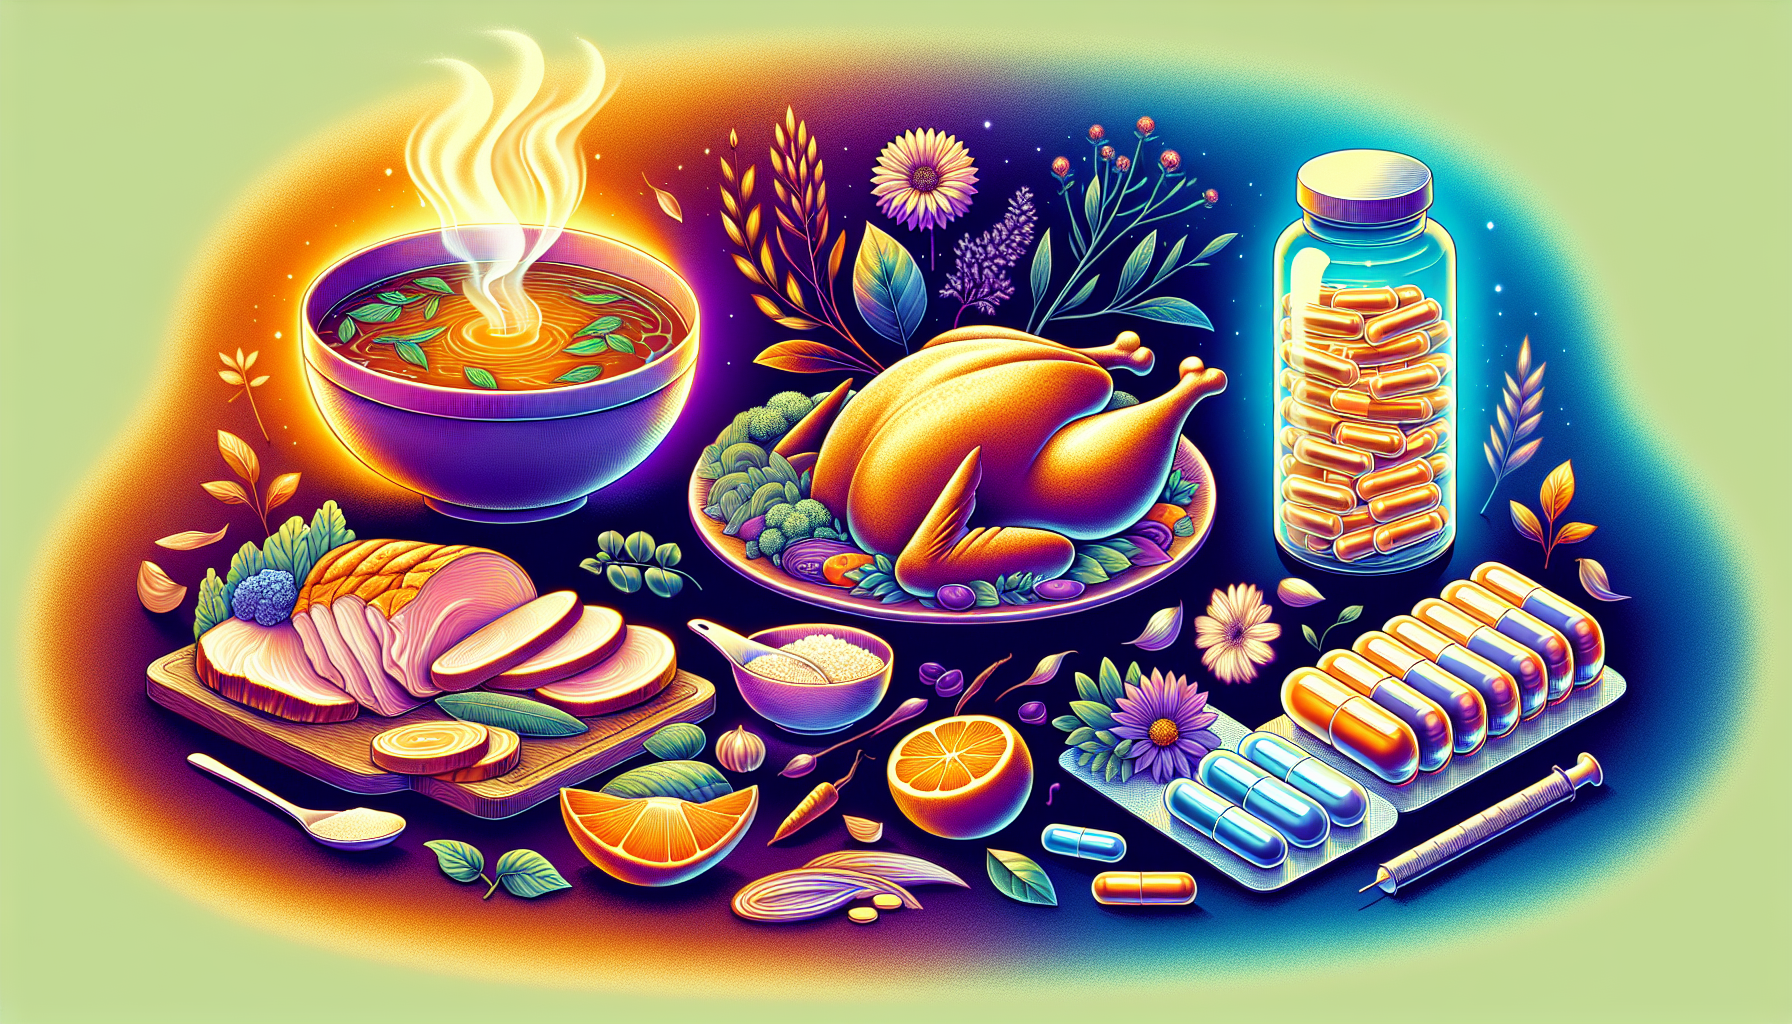 Illustration of collagen-rich foods and dietary supplements